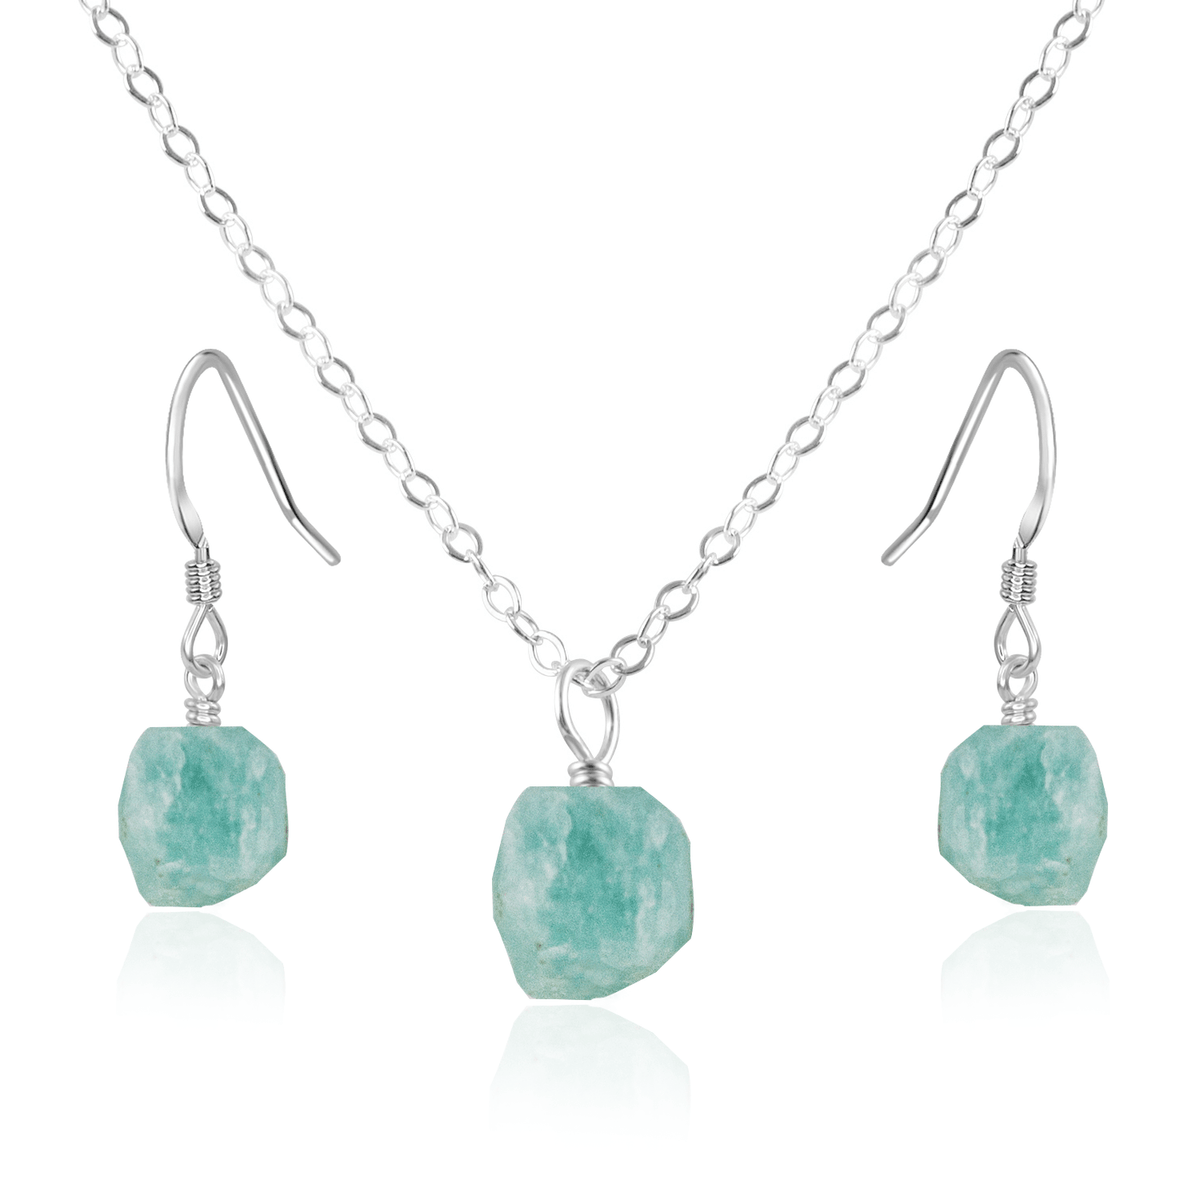 Raw Amazonite Crystal Earrings & Necklace Set - Raw Amazonite Crystal Earrings & Necklace Set - Sterling Silver / Cable - Luna Tide Handmade Crystal Jewellery